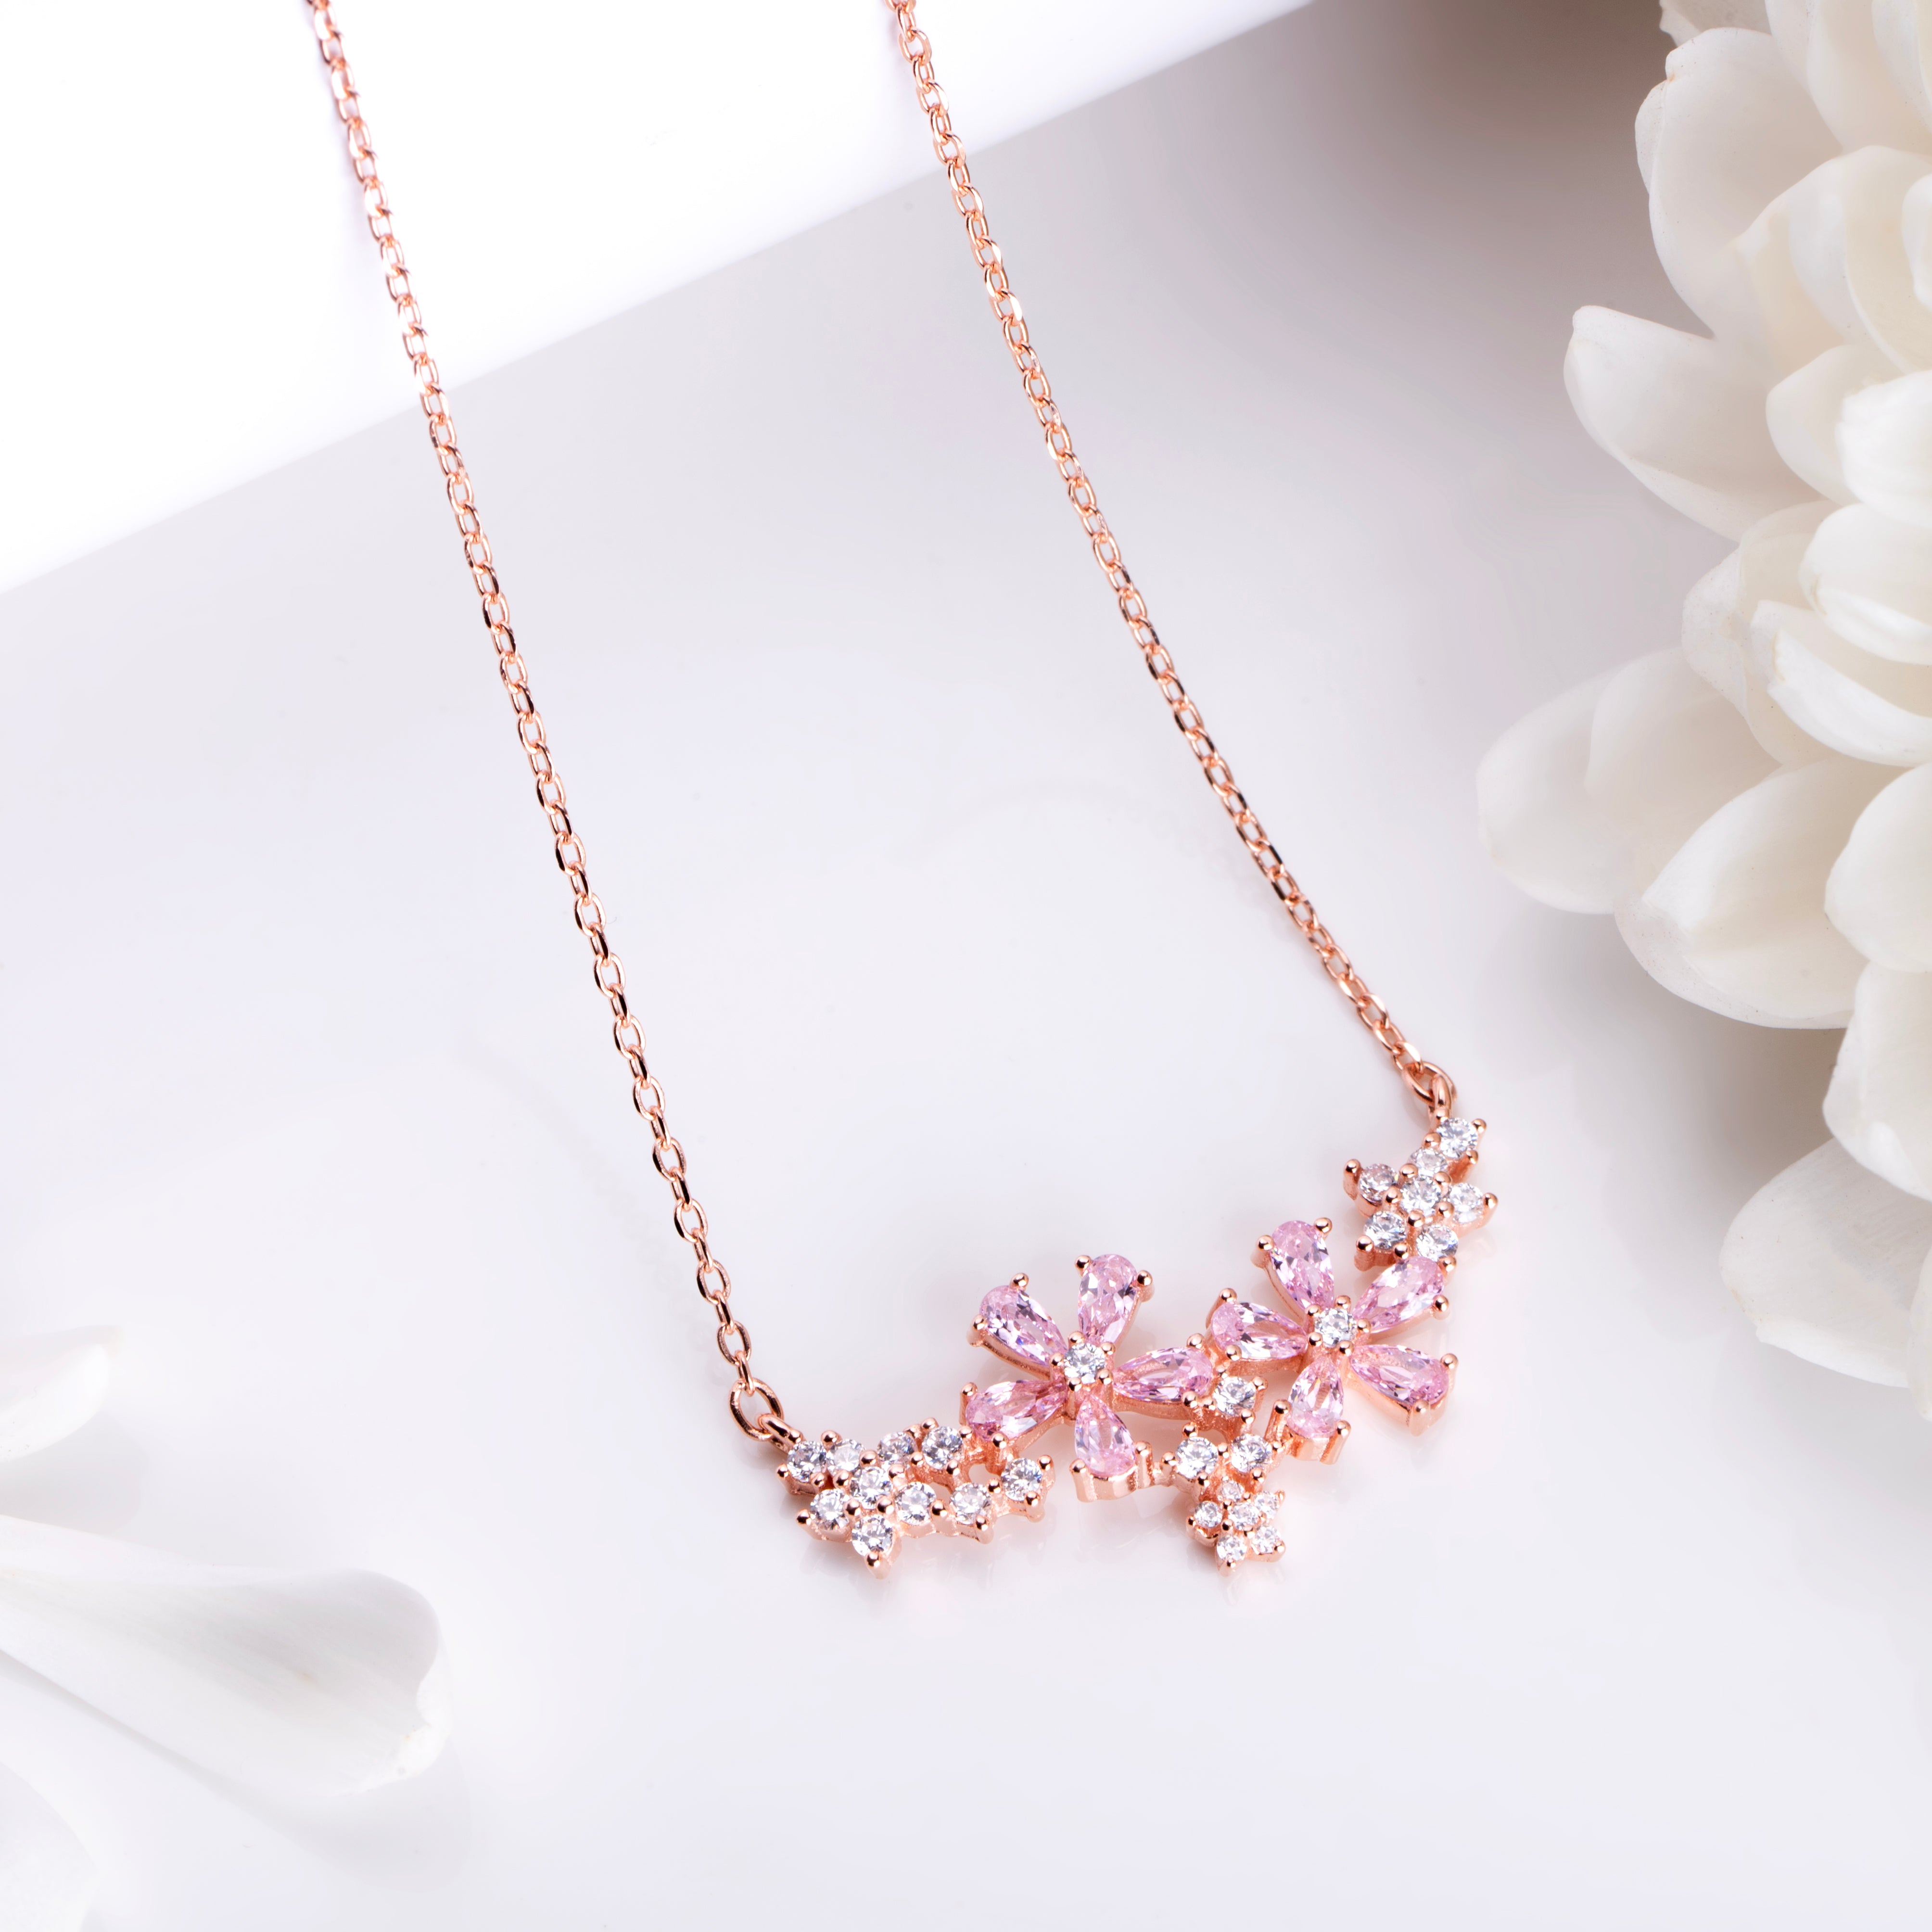 Blooming Blossoms 925 Sterling Silver Rose Gold-Plated Flower Necklace